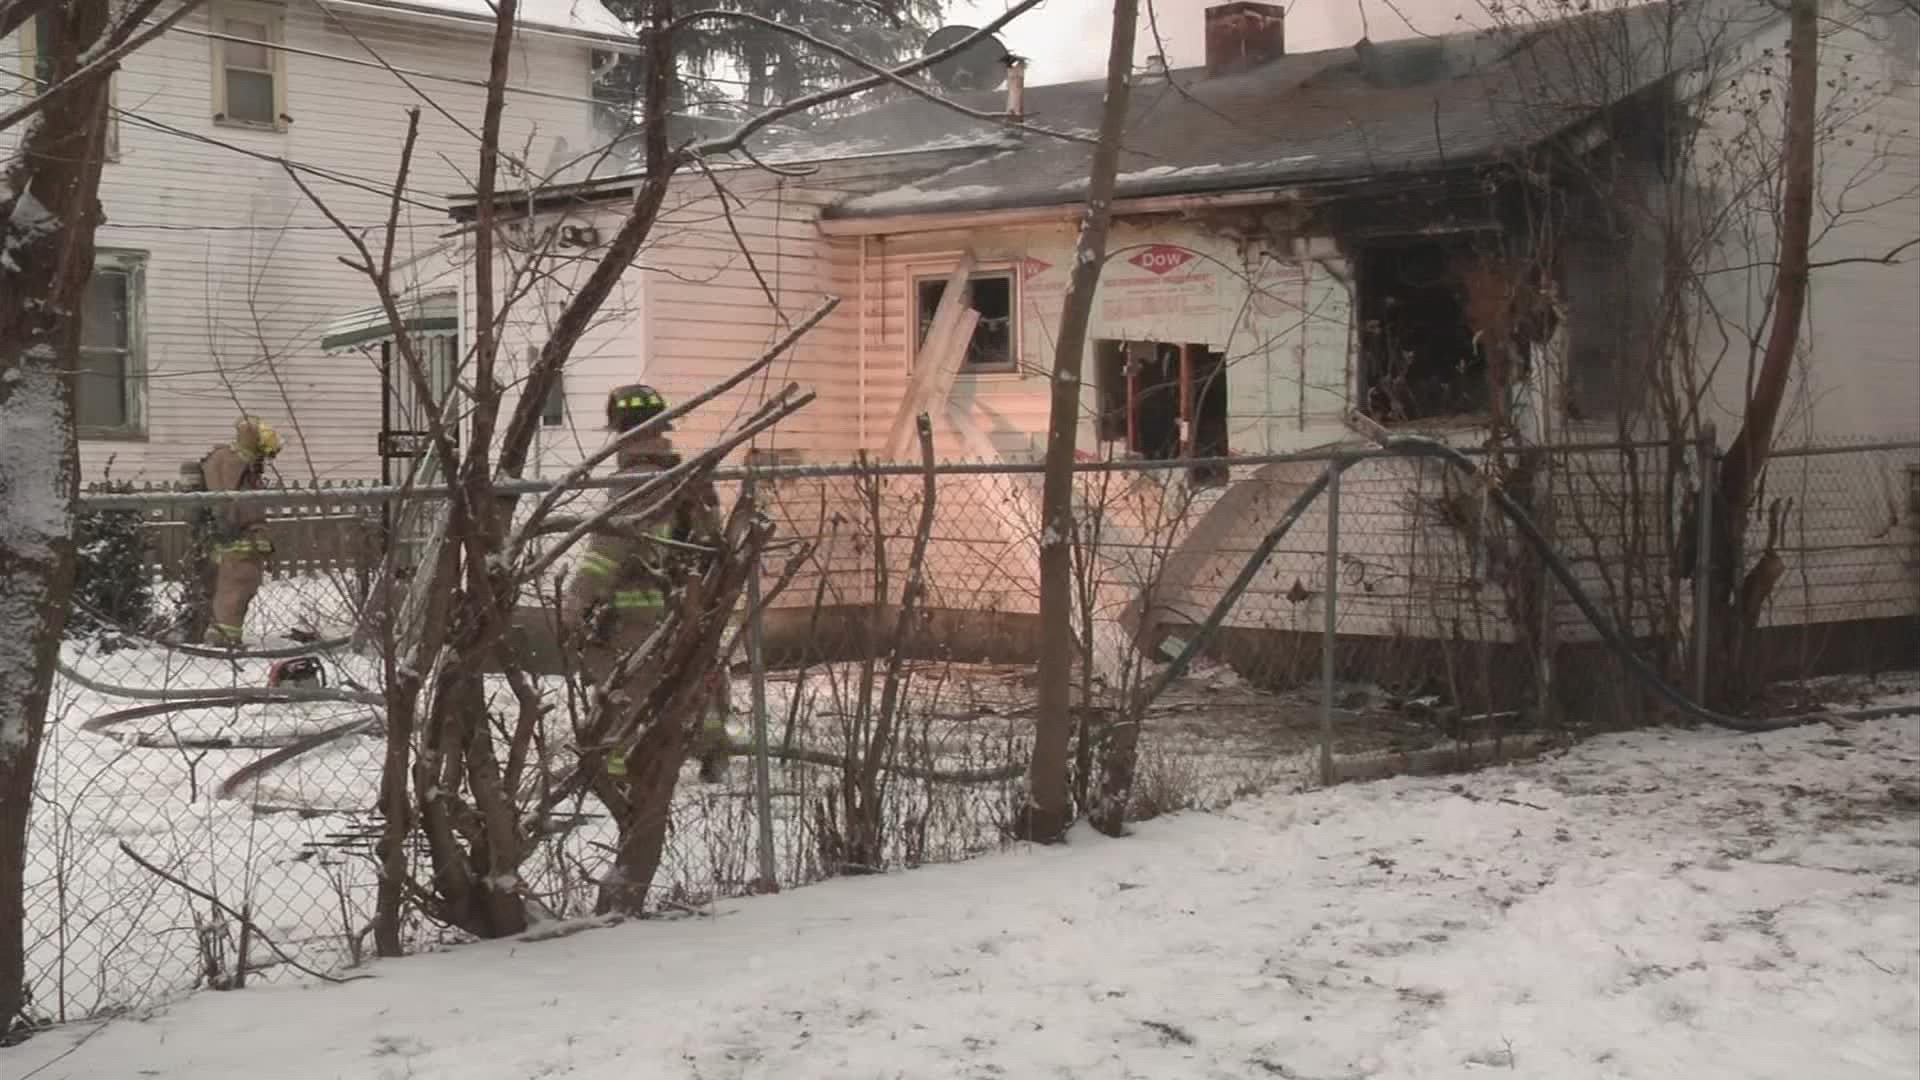 A neighbor called to report the fire at a home in the 300 block of Lechner Avenue around 7:40 a.m.